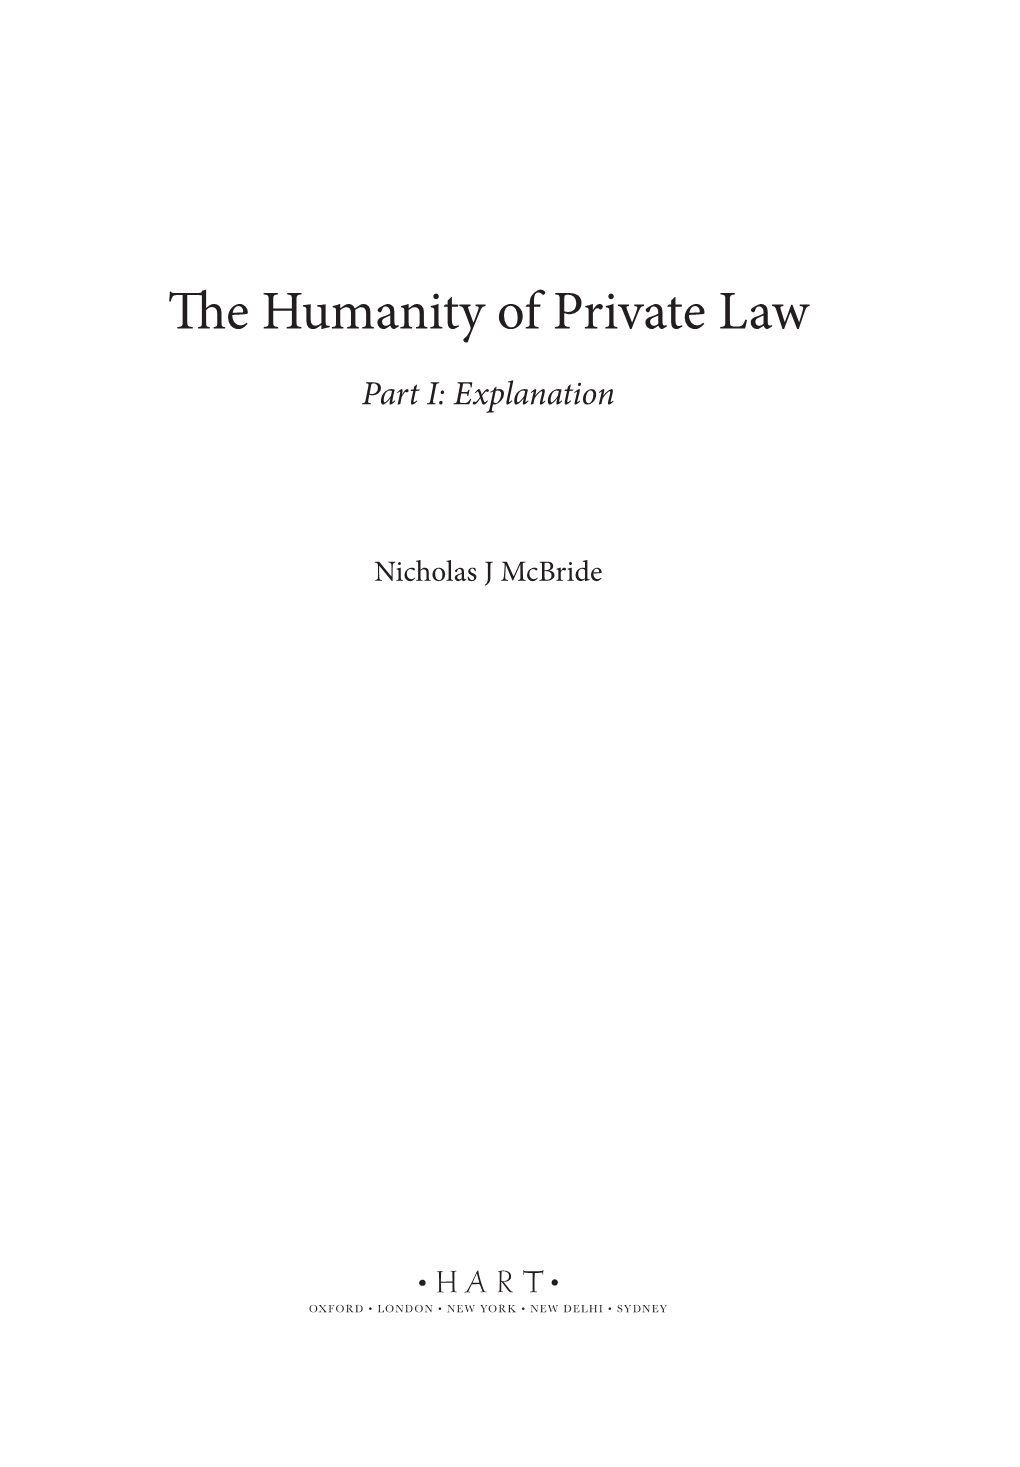 The Humanity of Private Law / Nicholas J Mcbride